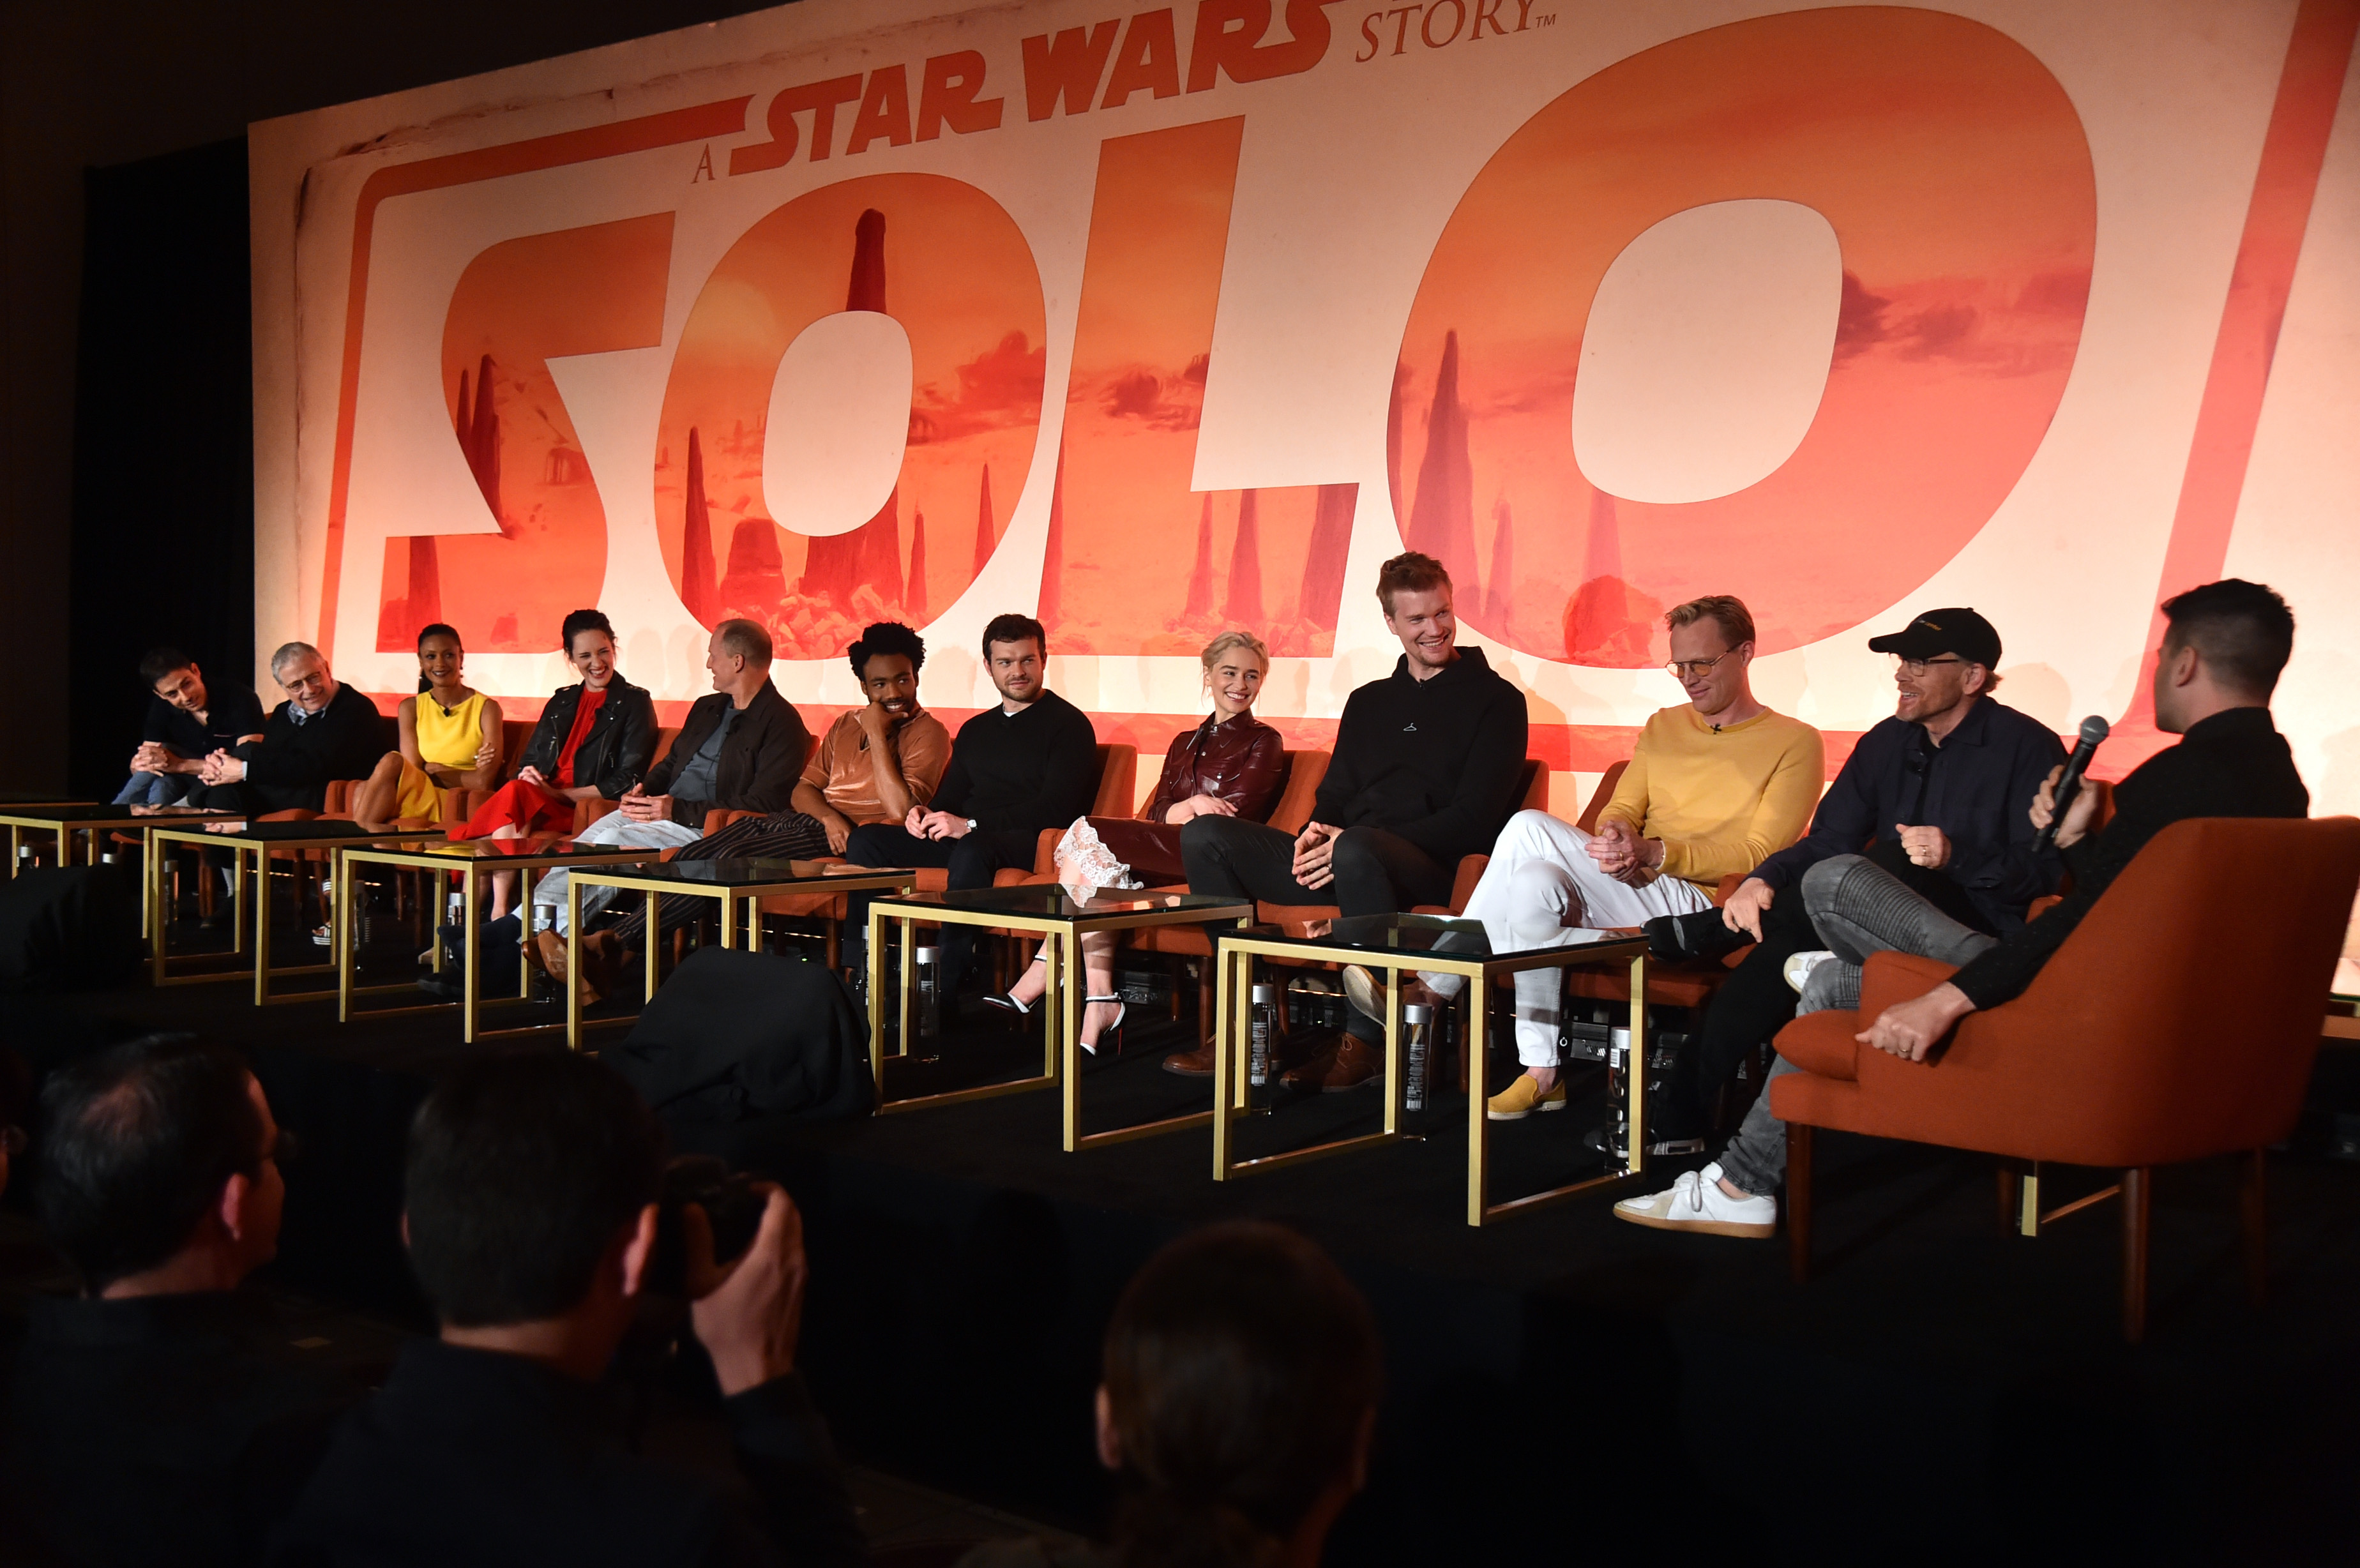 ‘Solo: A Star Wars Story’ Press Junket & Meeting Donald Glover!